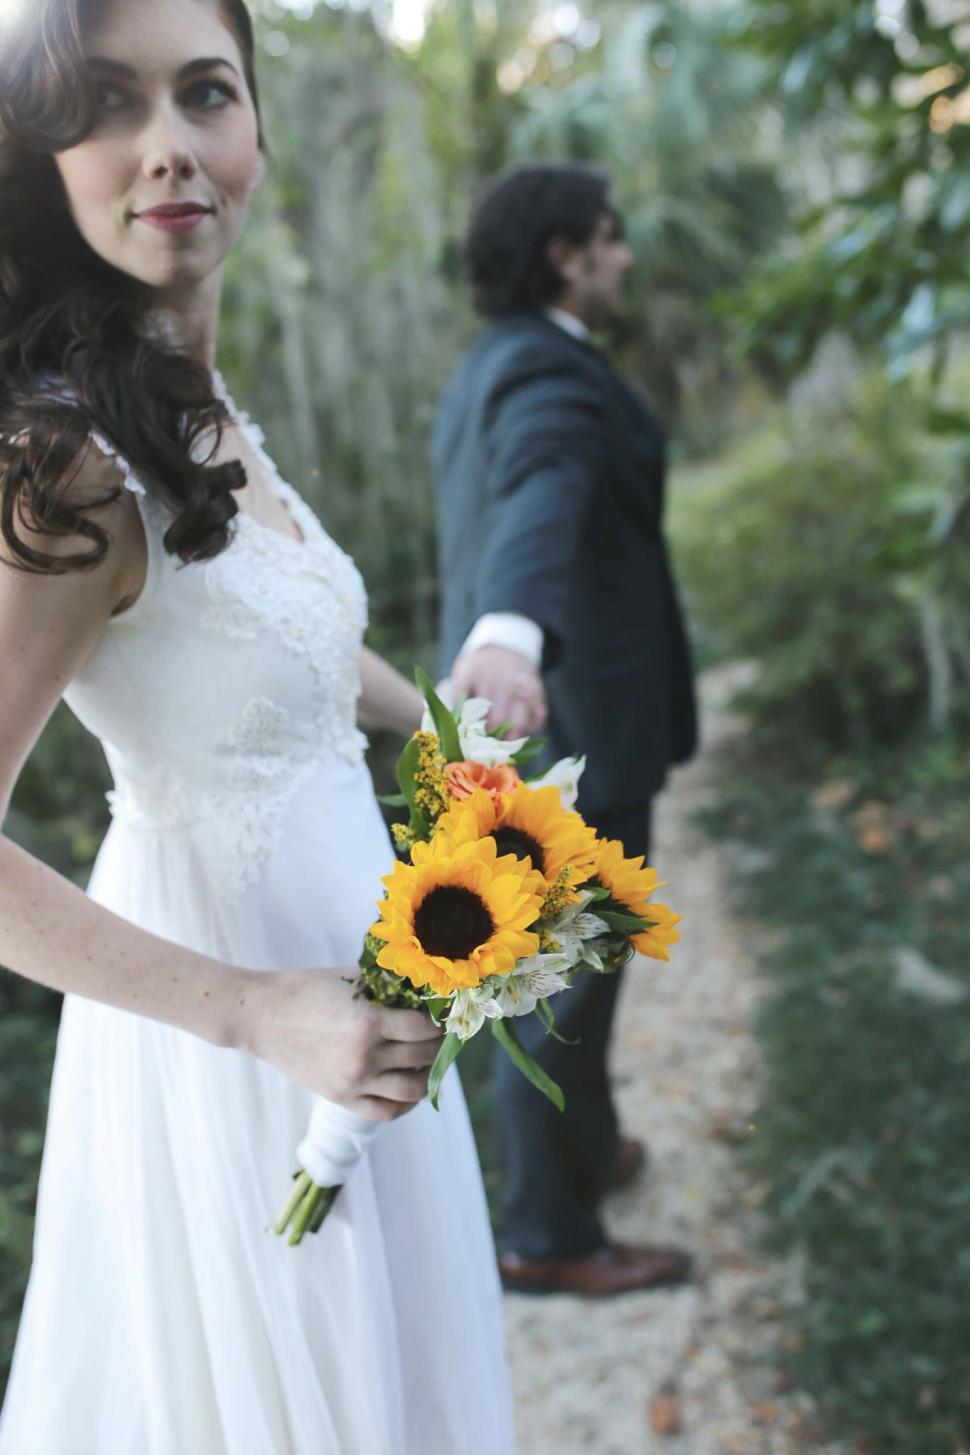 Free Image of Bride and groom holding hands with wedding flower bouquet in the 